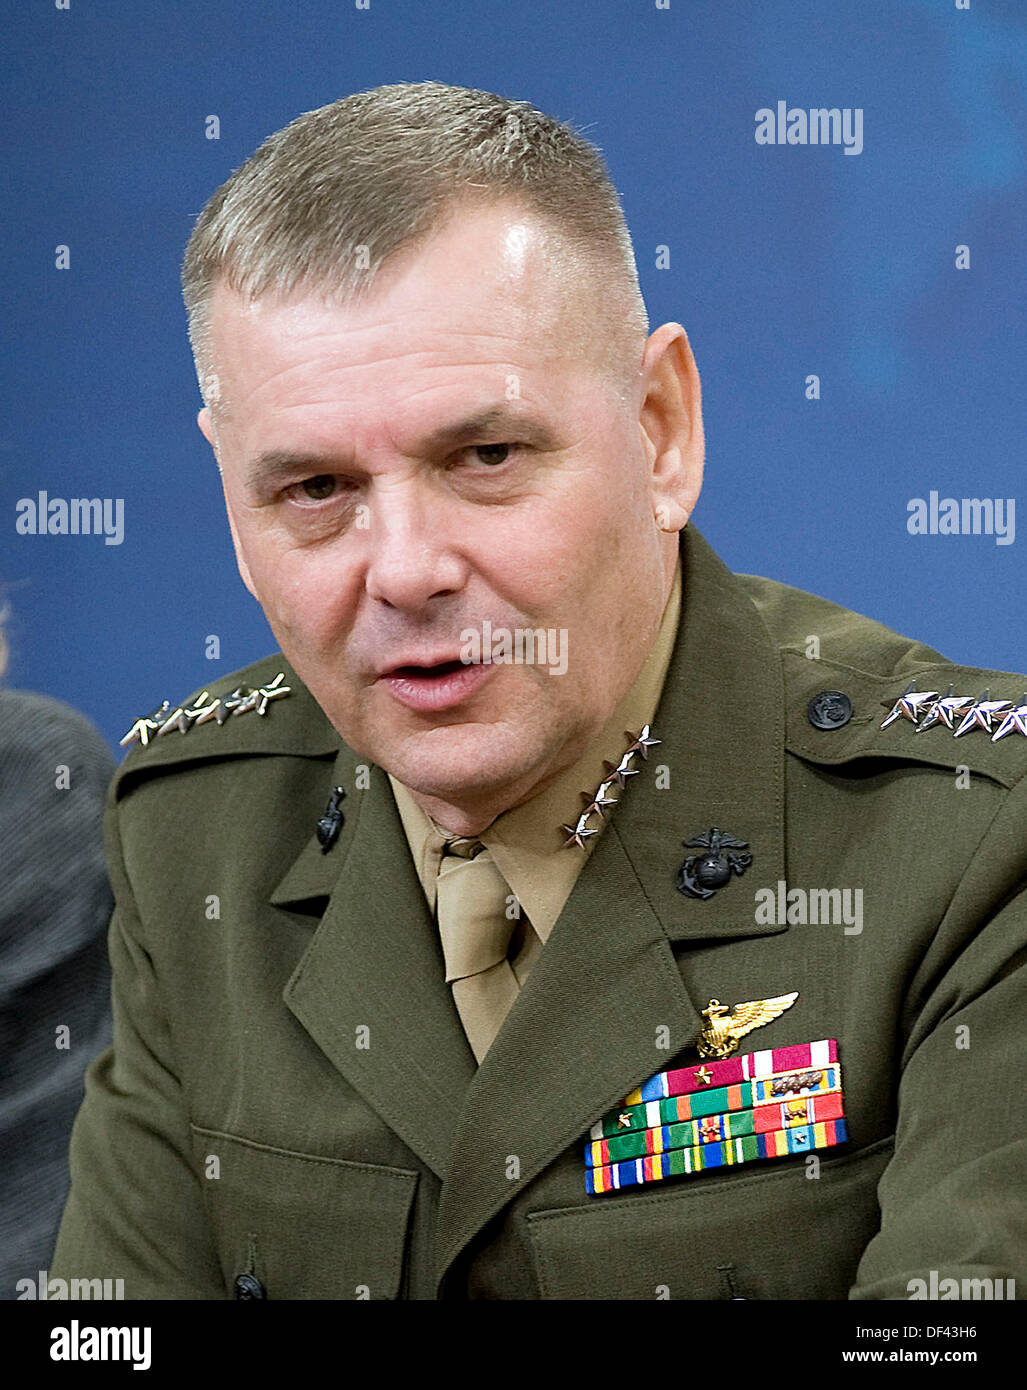 United States Marine General James E. Cartwright, Jr., Vice Chairman of the Joint Chiefs of Staff, answers questions from the press following Defense Secretary Robert M. Gates' press conference at the Pentagon, August 9, 2010. Cartwright is a target of a Justice Department investigation into a leak of information about a covert U.S.-Israeli cyberattack on Iranâ??s nuclear program. Mandatory Credit: Cherie Cullen / DoD via CNP Stock Photo